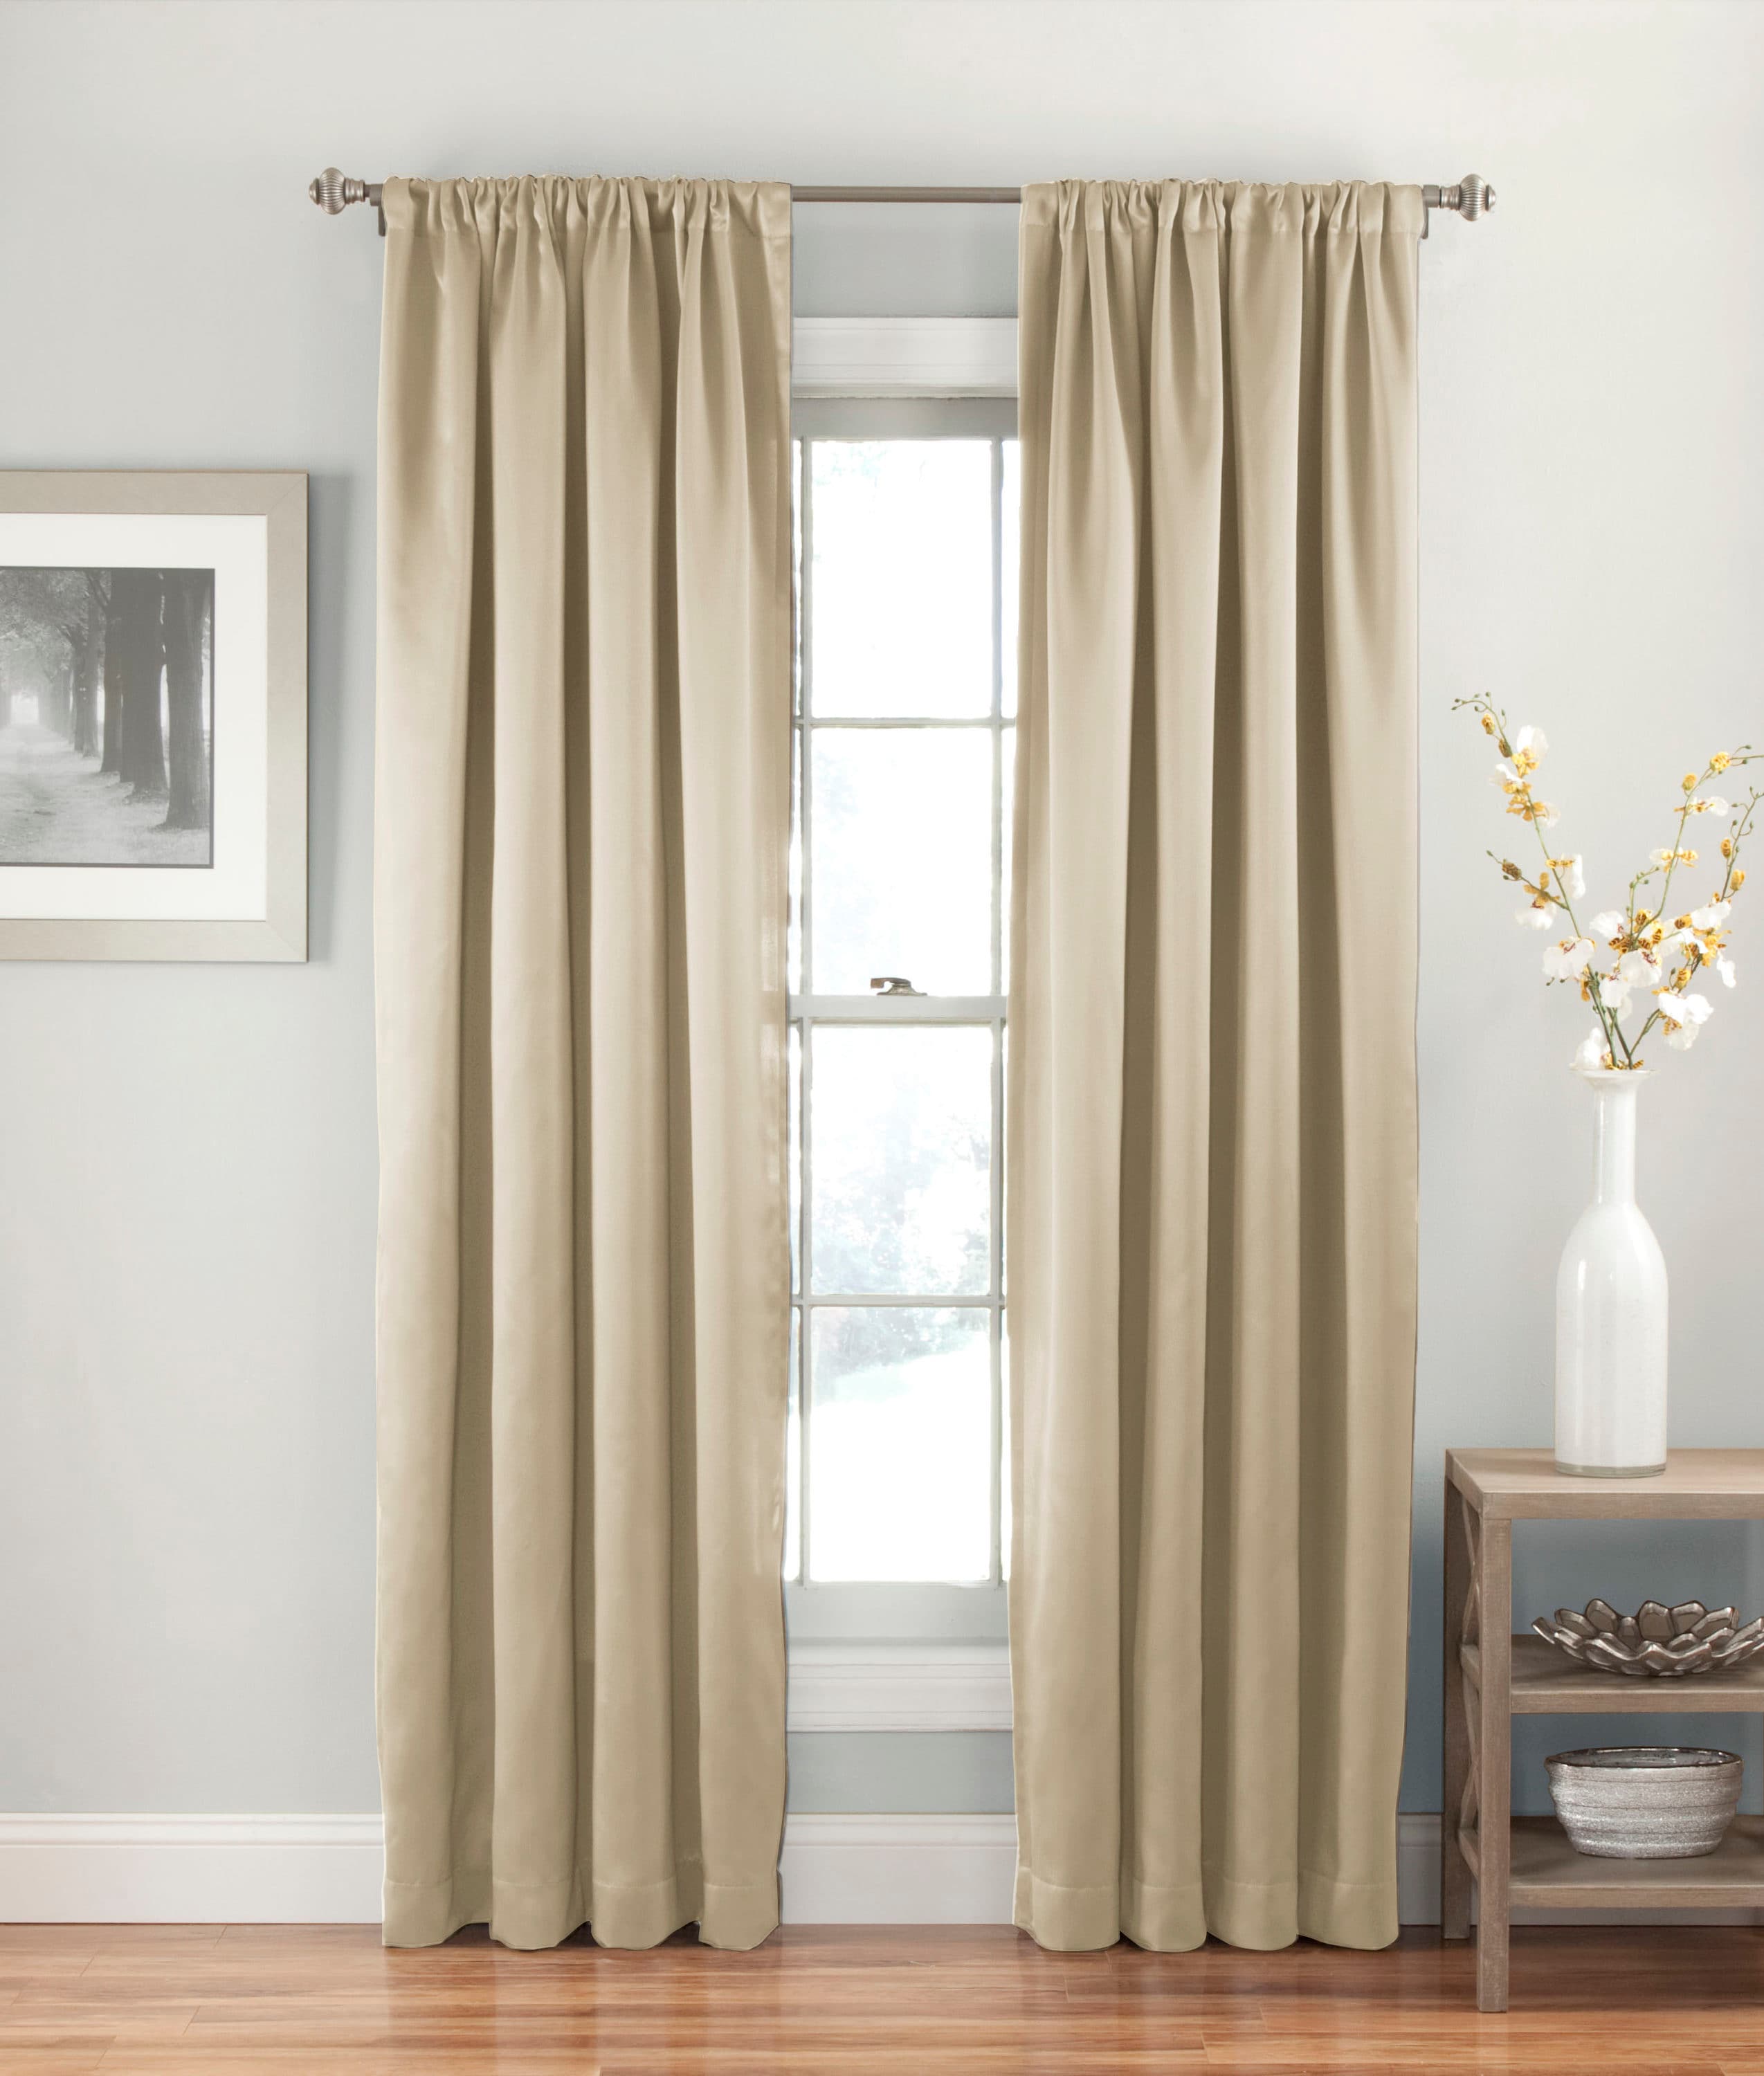 Set 2 Solid Taupe Beige Window Curtains Panels Drapes 63 84 95 in Bronze Grommet 